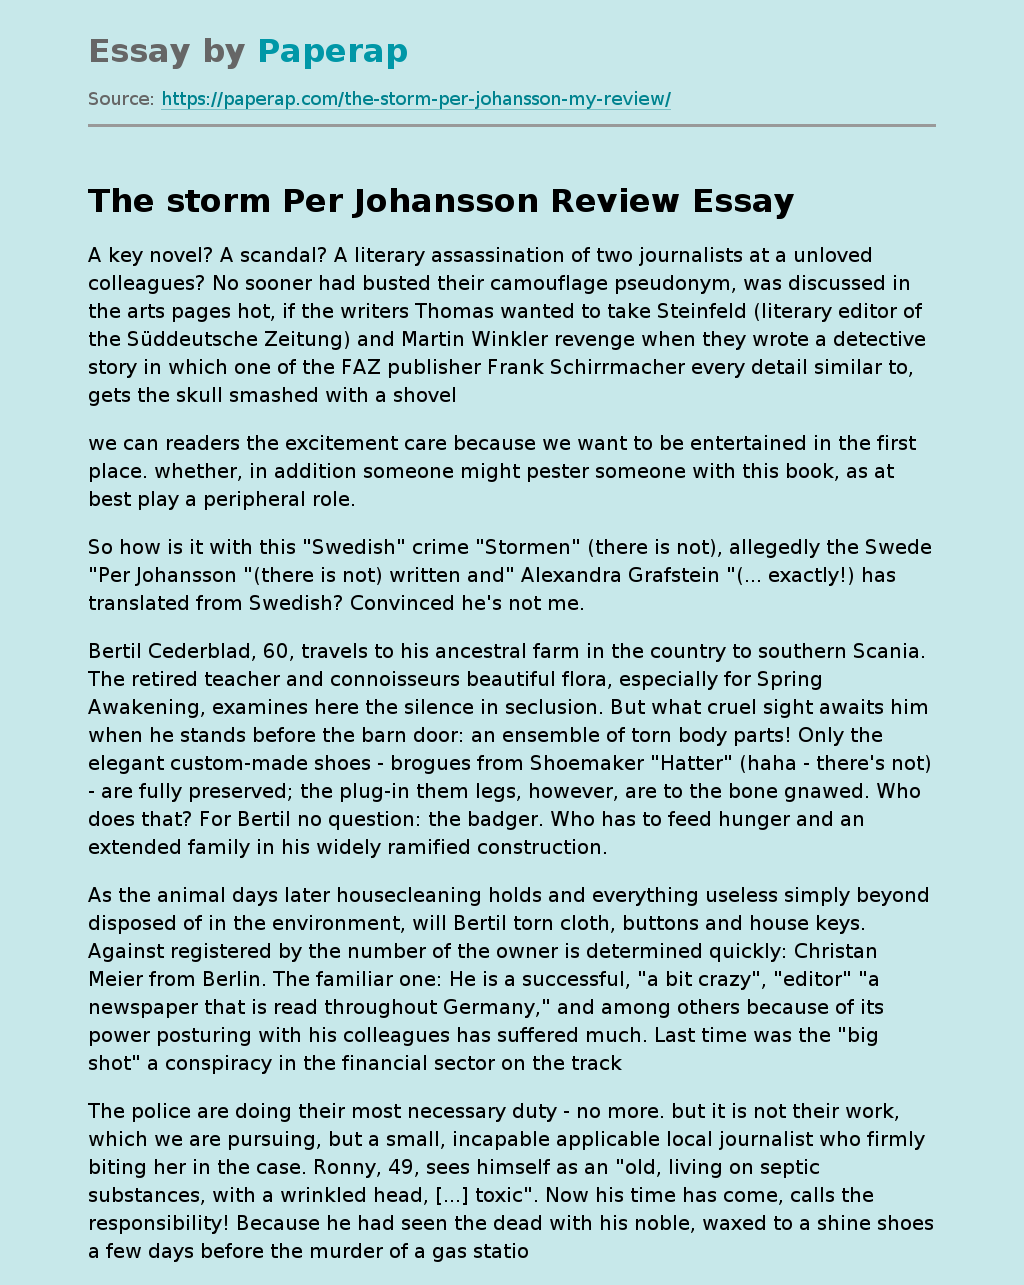 Book "The storm" by Per Johansson